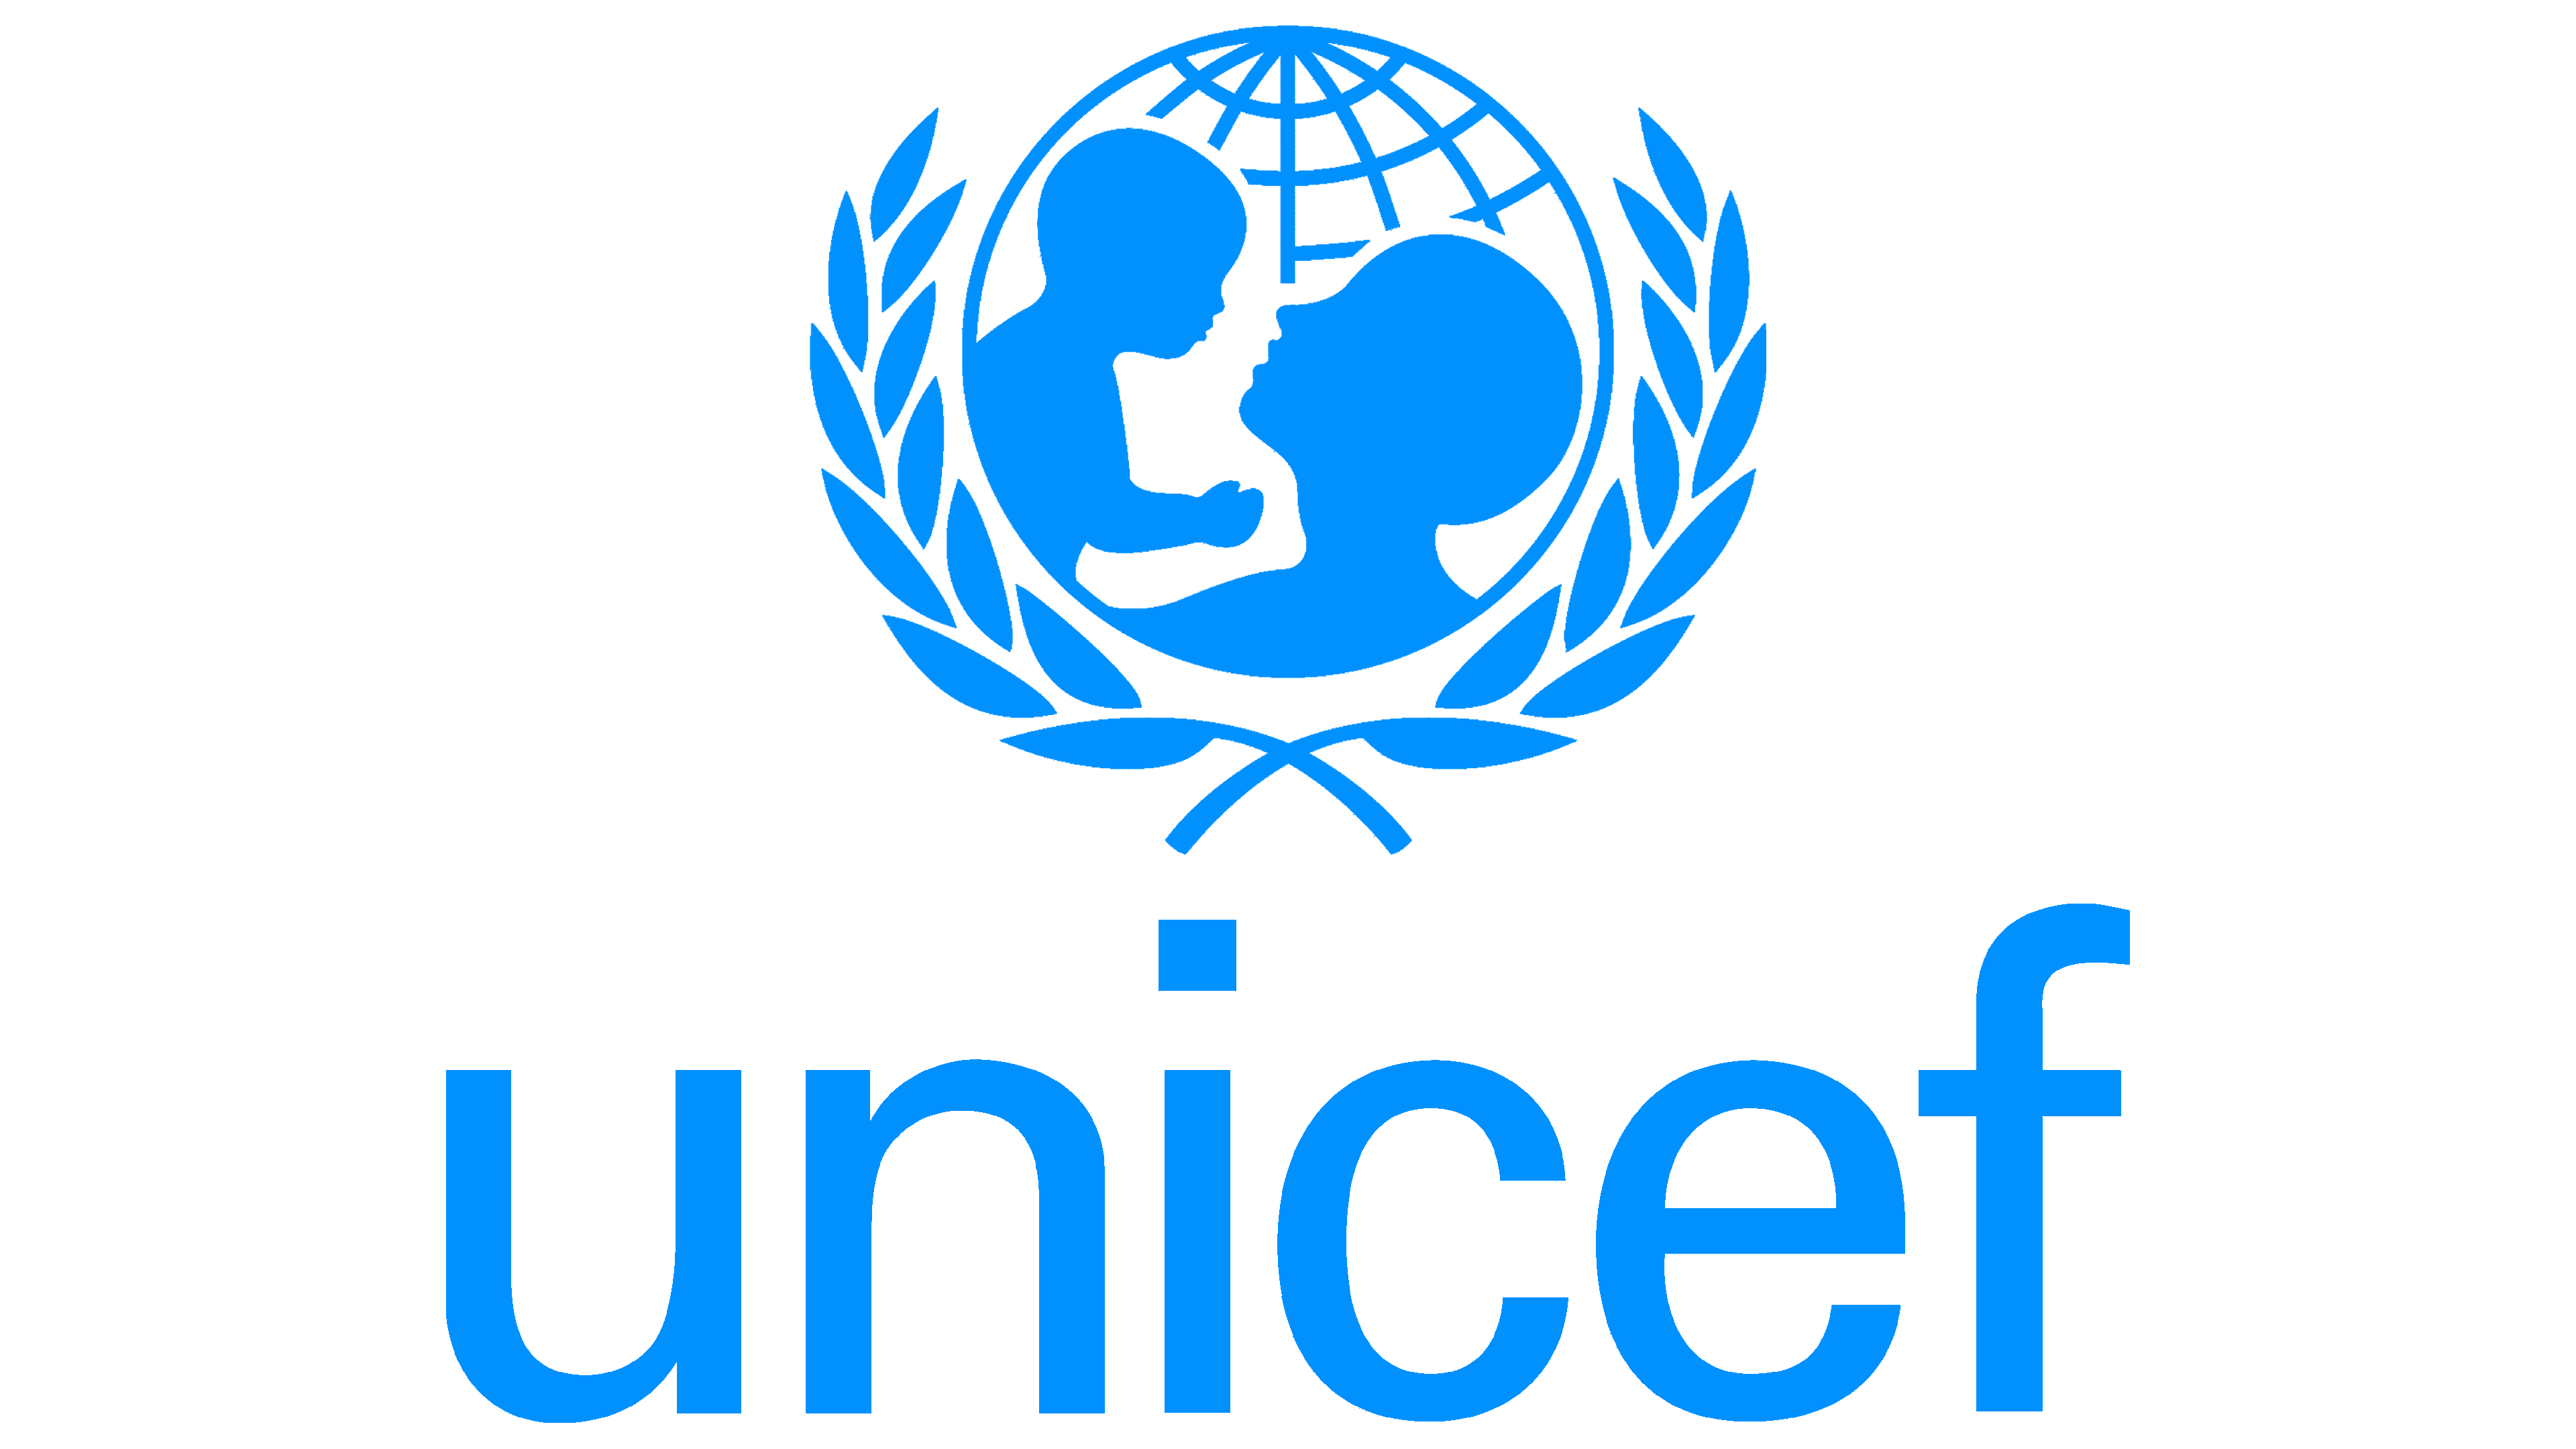 UNICEF Logo, symbol, meaning, history, PNG